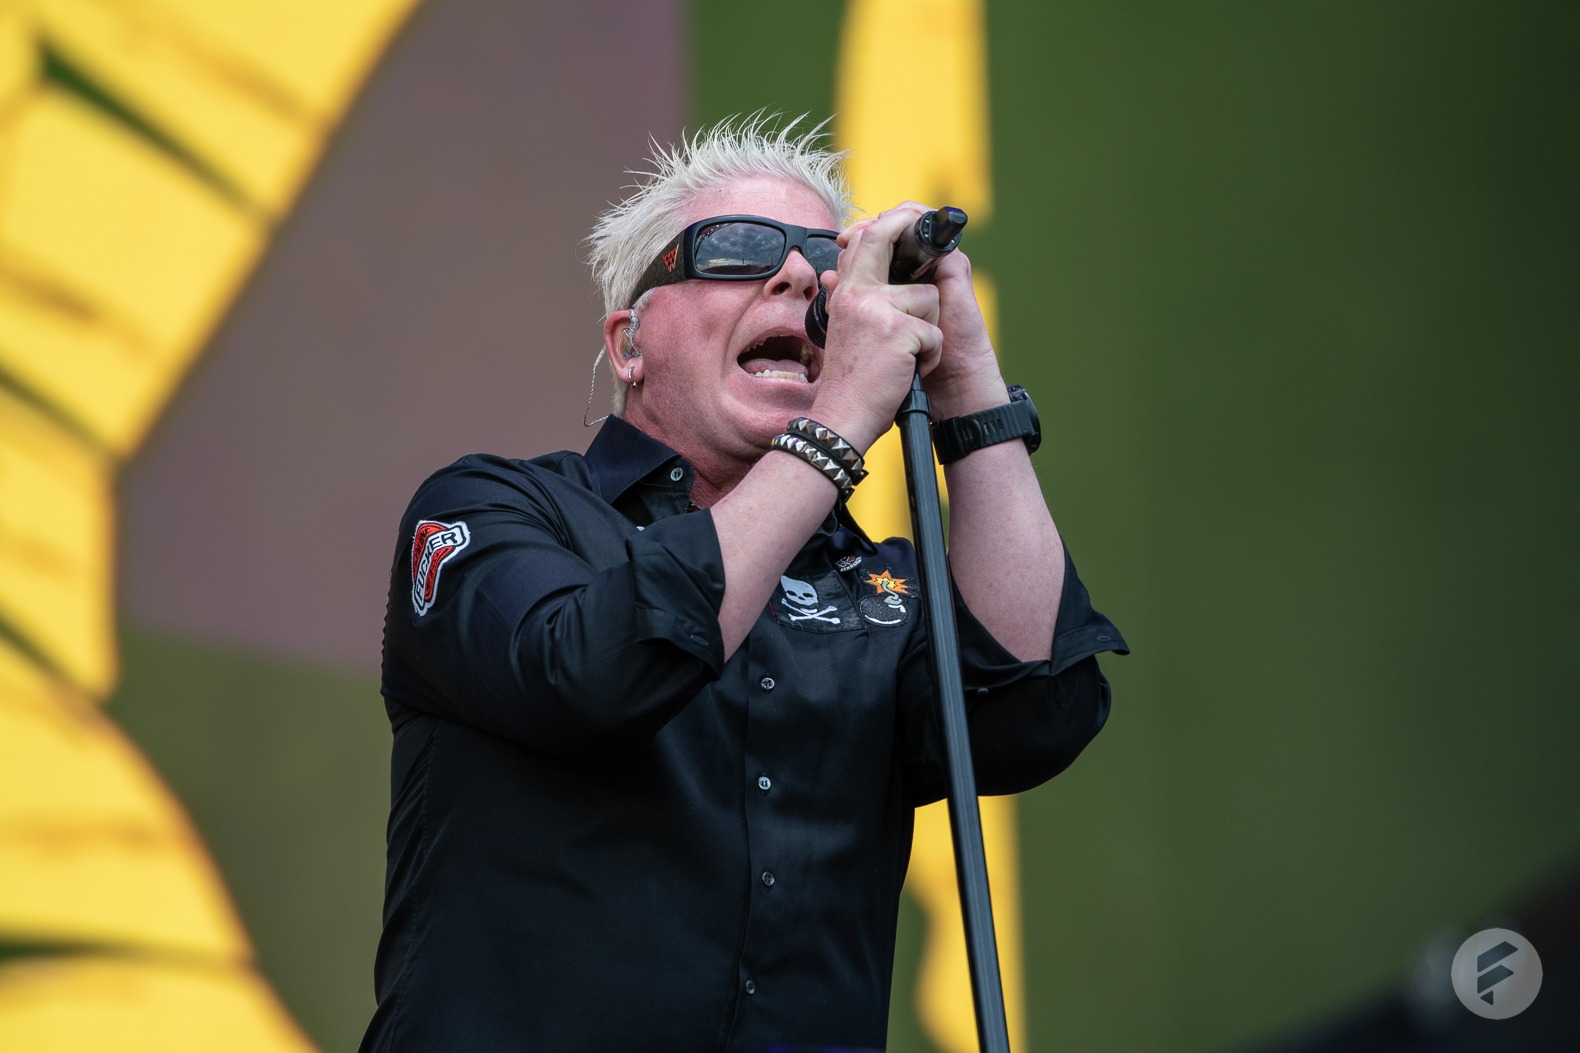 The Offspring | Rock am Ring 2022